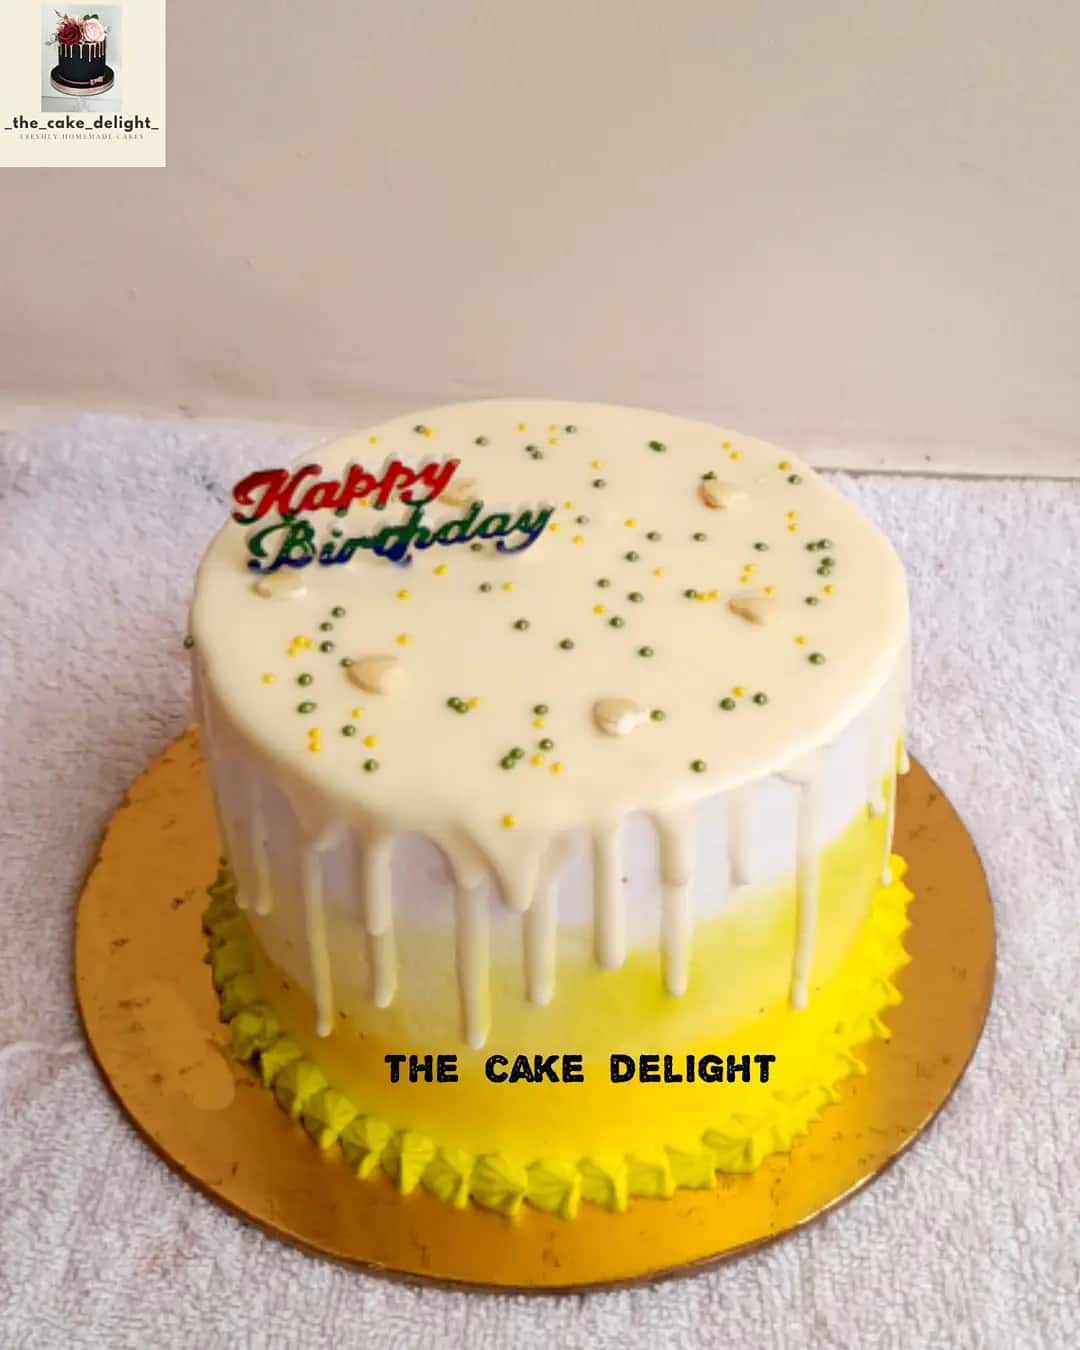 Aggregate more than 66 cake delights bakery best - awesomeenglish.edu.vn